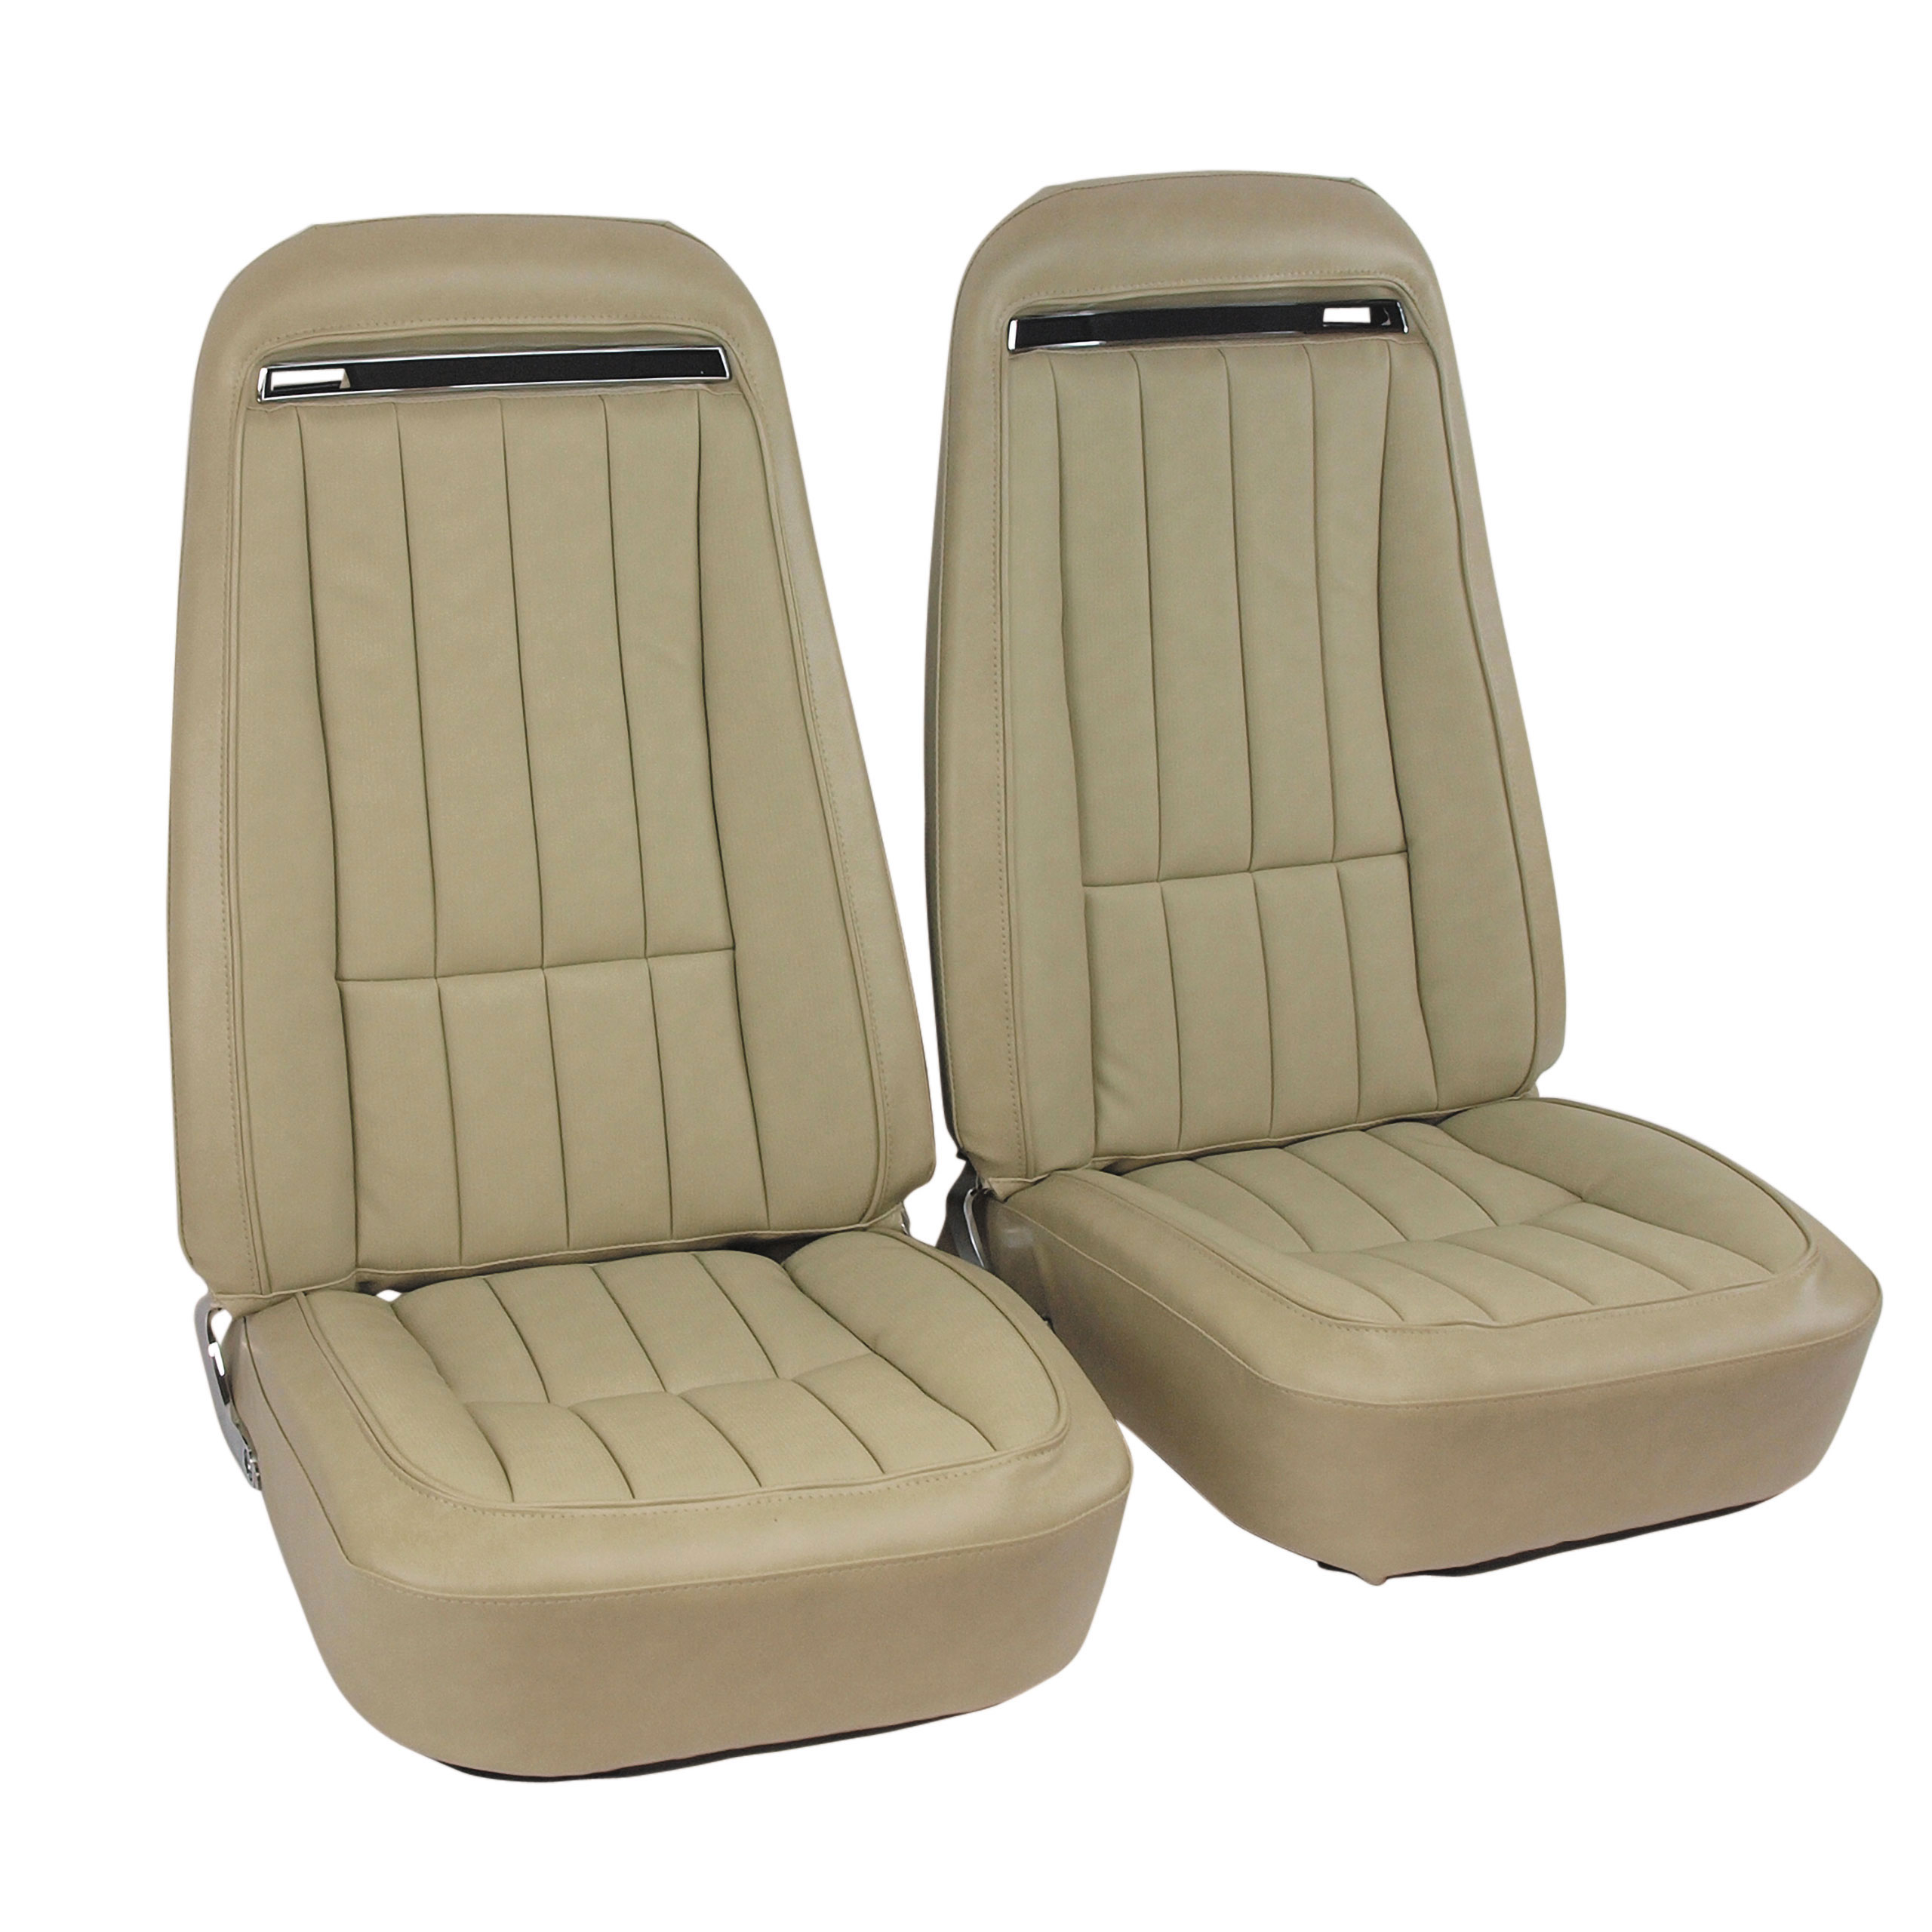 1975 C3 Corvette Mounted Seats Neutral "Leather-Like" Vinyl With Shoulder Harness